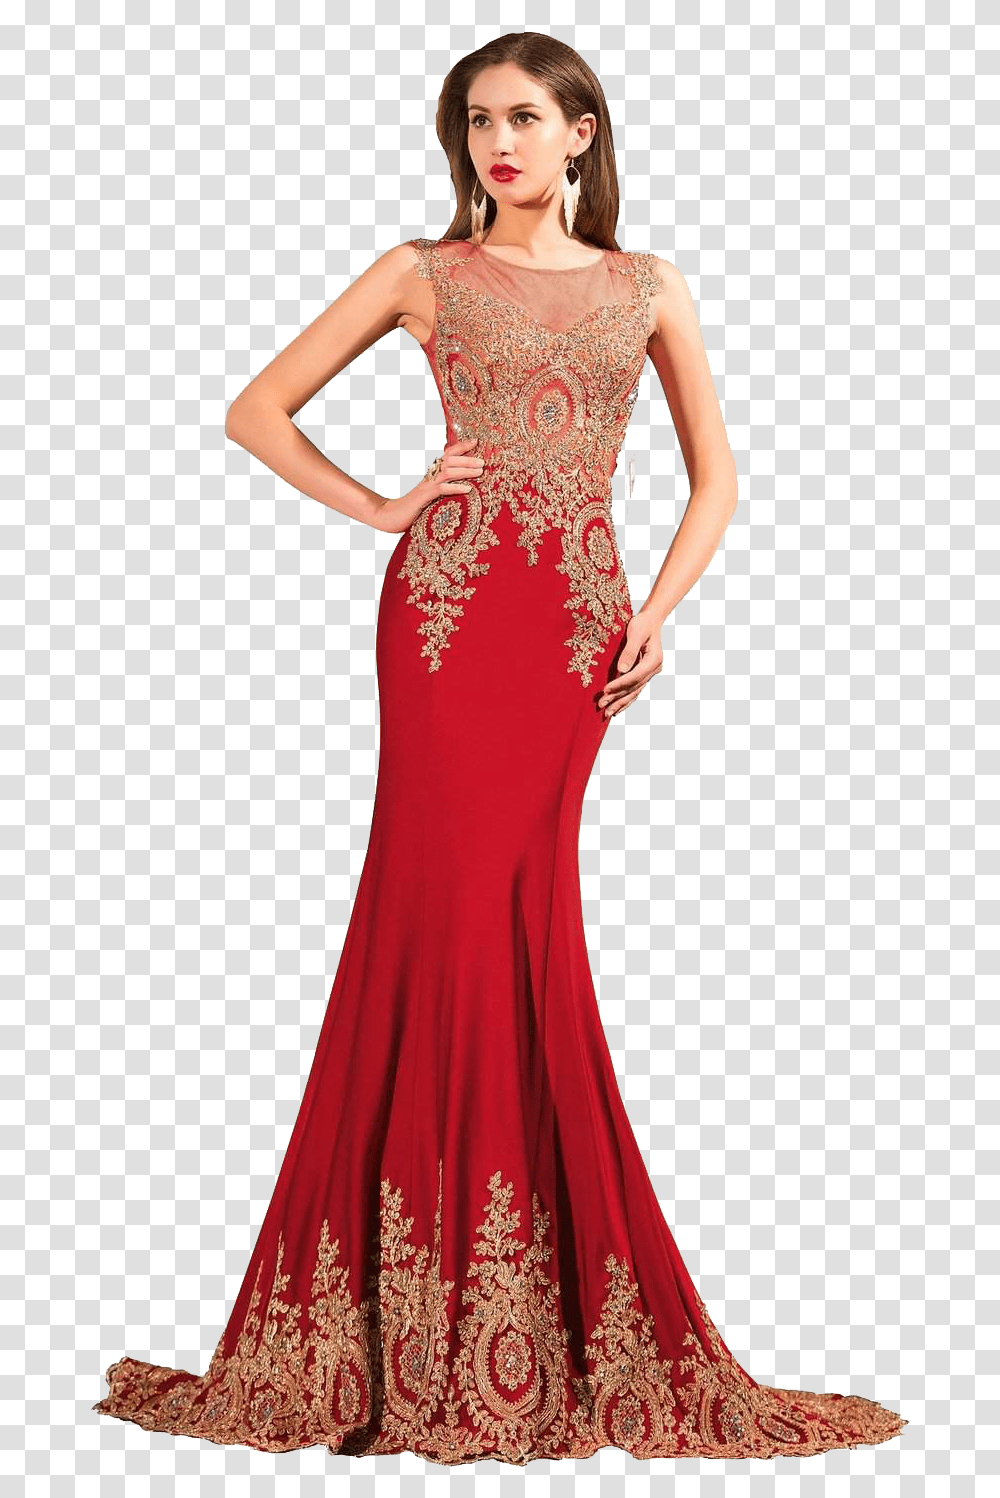 Red Bridal Gowns Free Background Wedding Red Dresses For Women, Apparel, Evening Dress, Robe Transparent Png